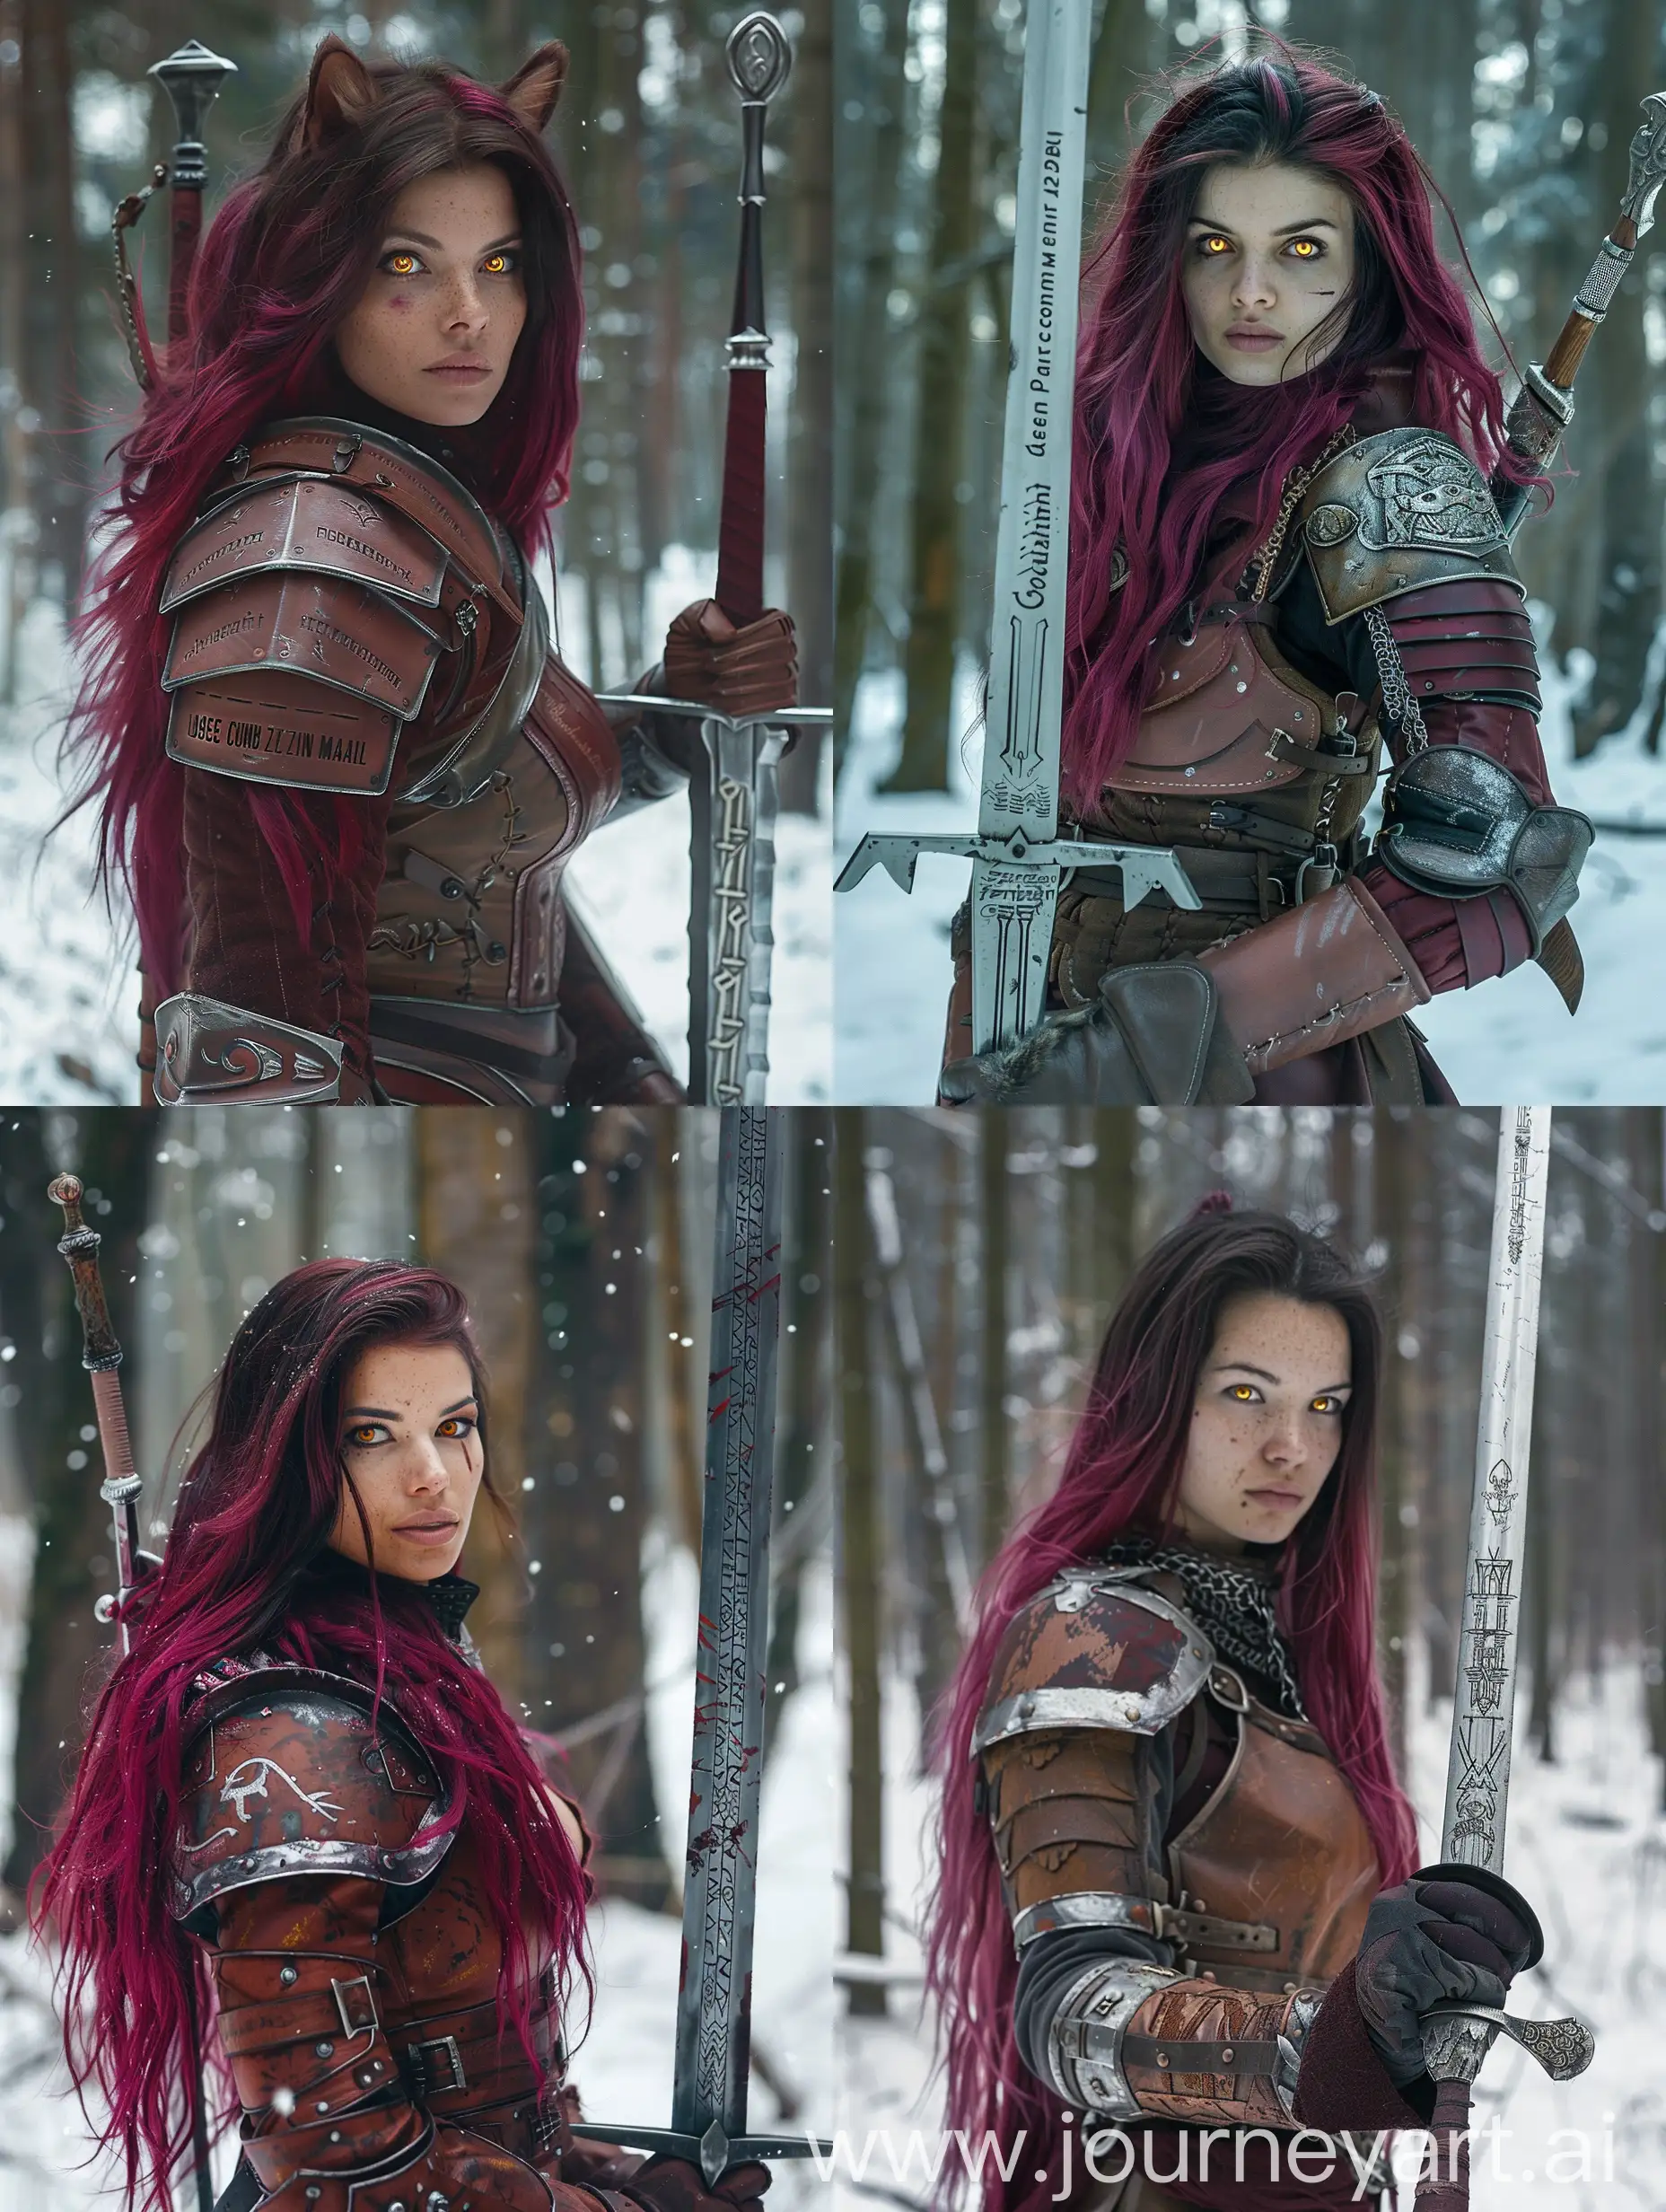 a photographic image of an intimidating woman witcher with dark pink long hair and honey bright cat eyes. She is tall, strong and with little scars. She is 29 years old ferocious soldier dressing in medieval armour red and brown colours holding a long silver sword with inscriptions. As photographed by Josselin Cornillon-Maillard in a winter forest background